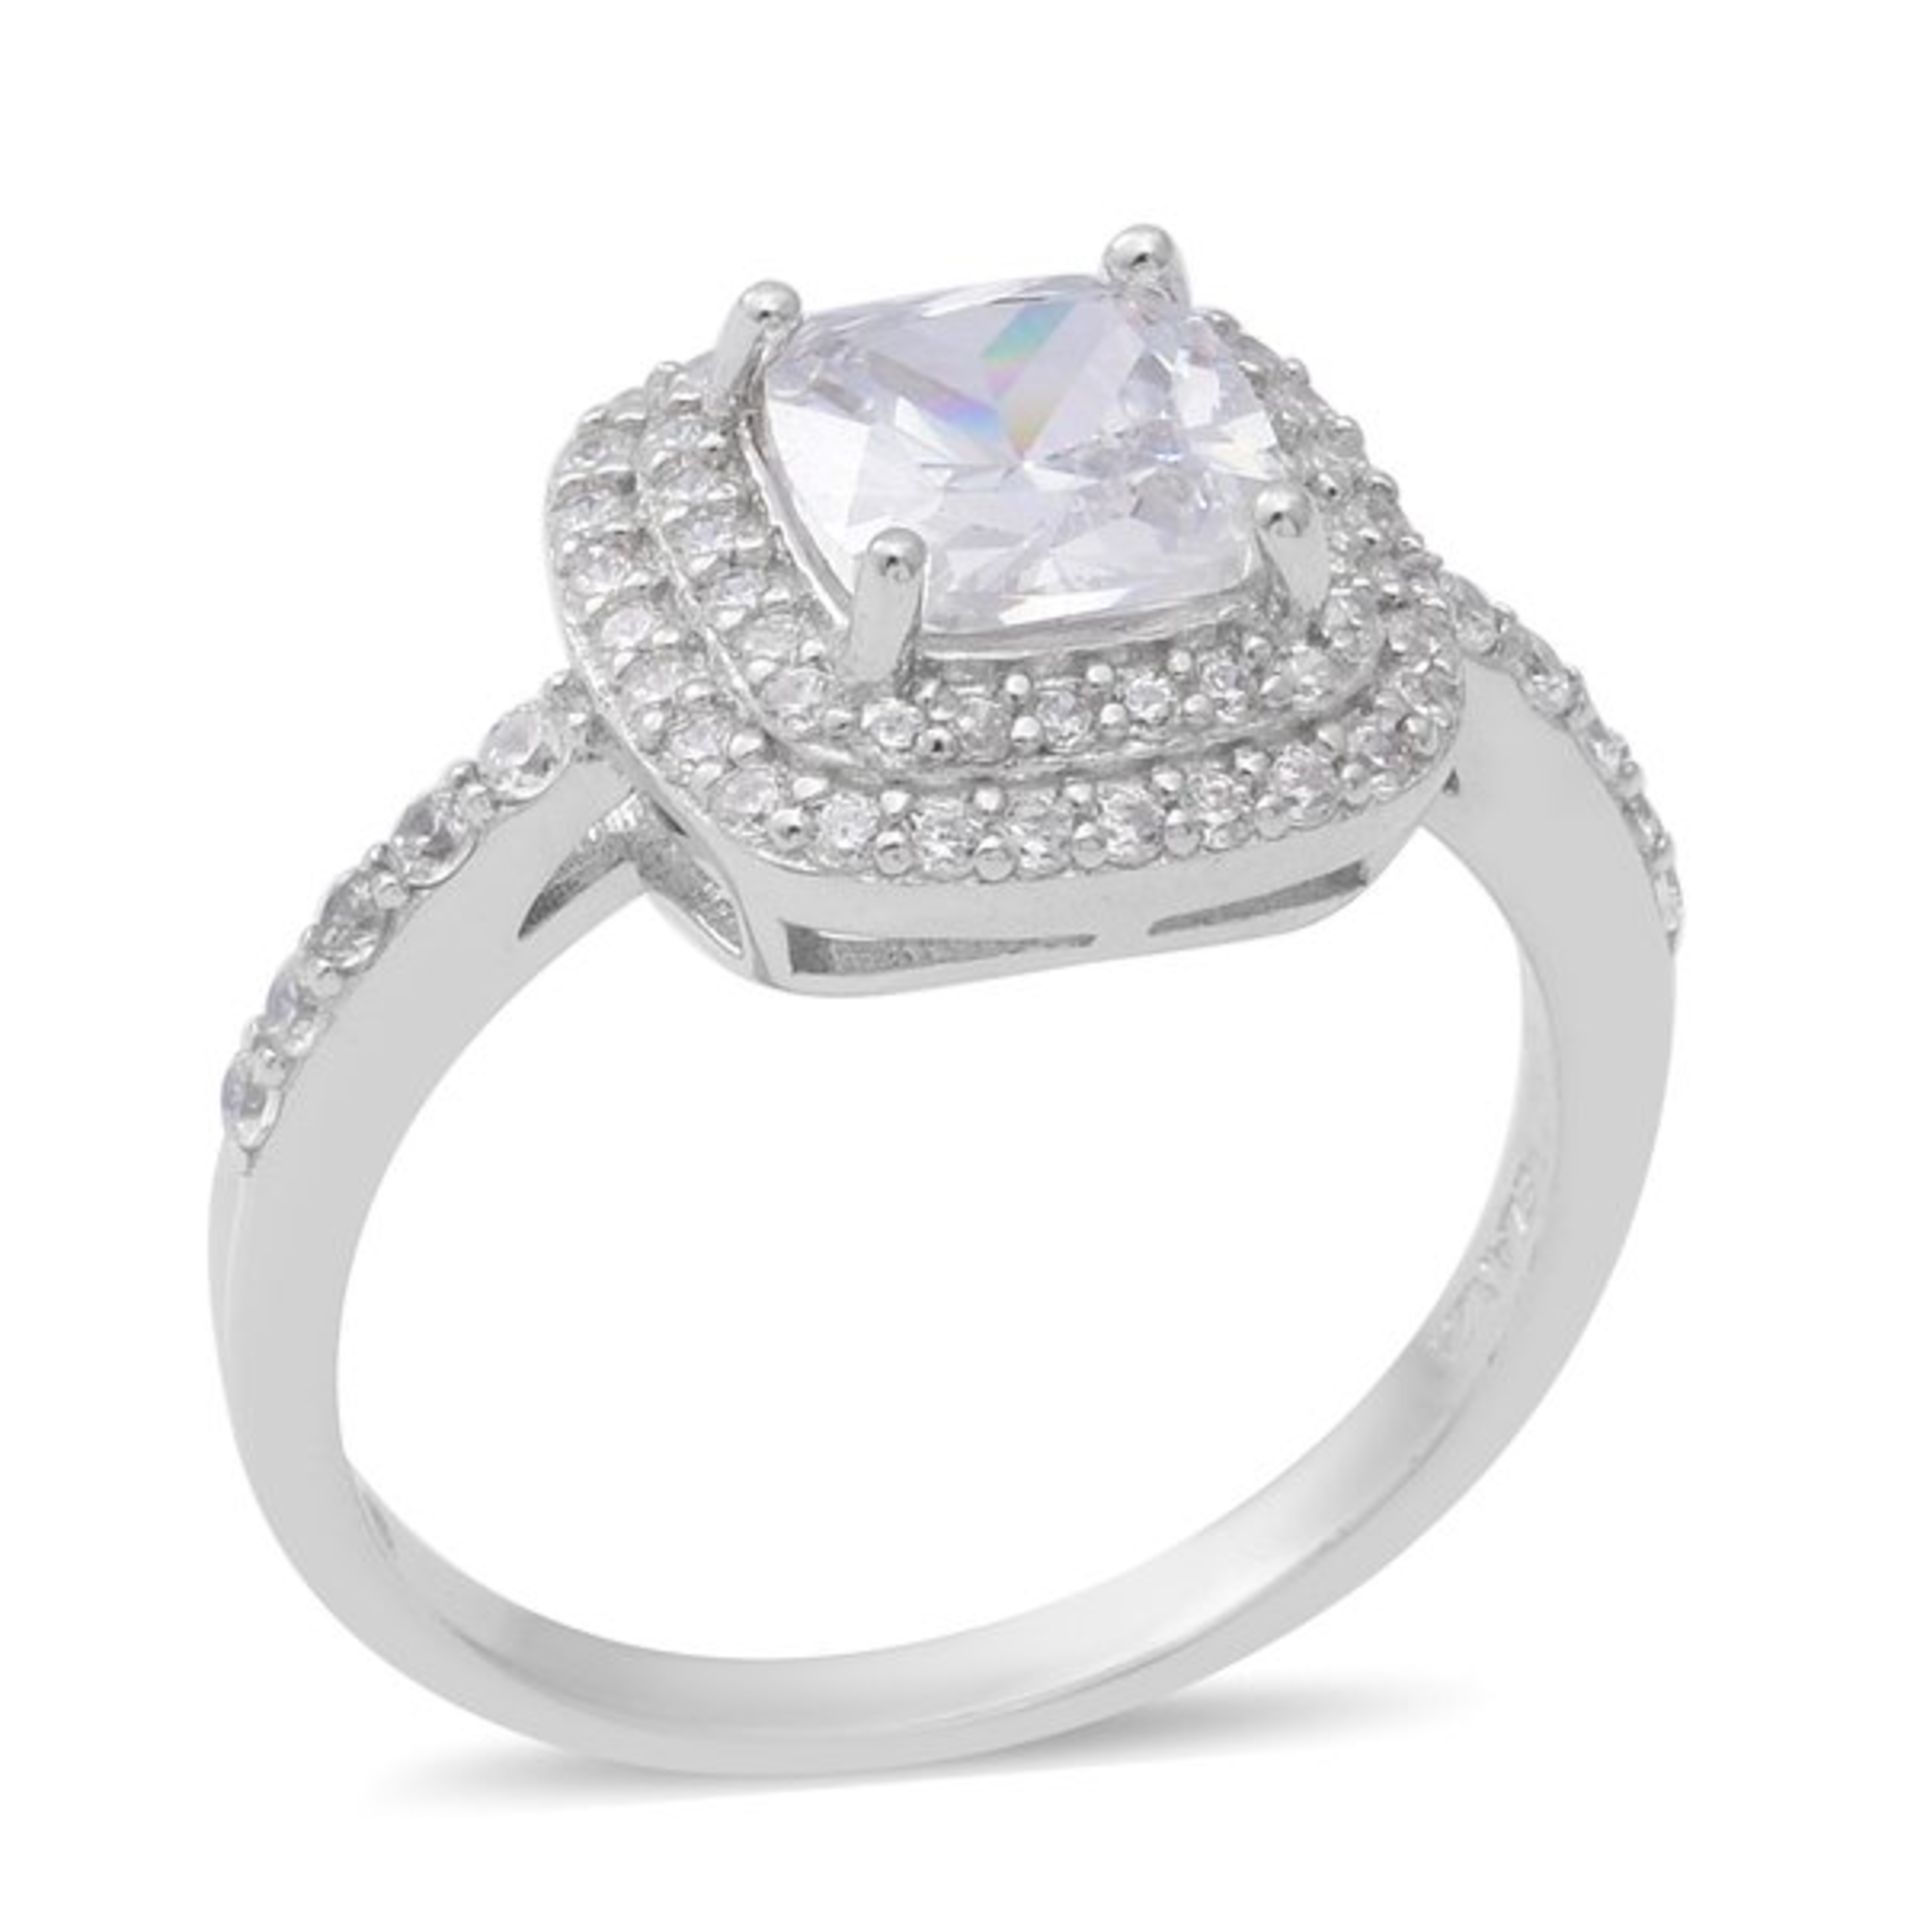 NEW!! ELANZA AAA Simulated Diamond Ring in Rhodium Overlay Sterling Silver